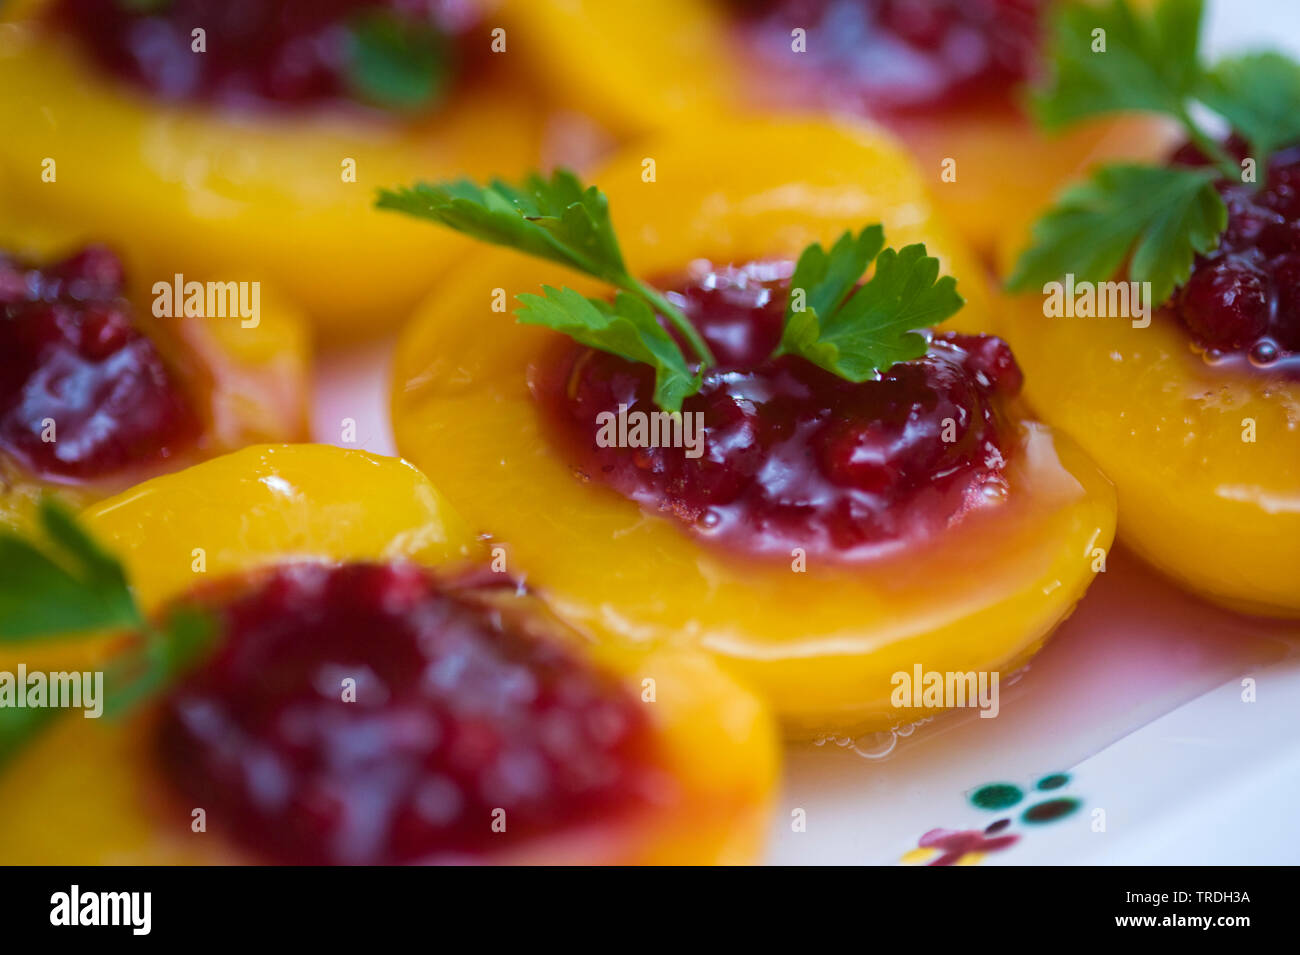 peaches filled with cranberries Stock Photo